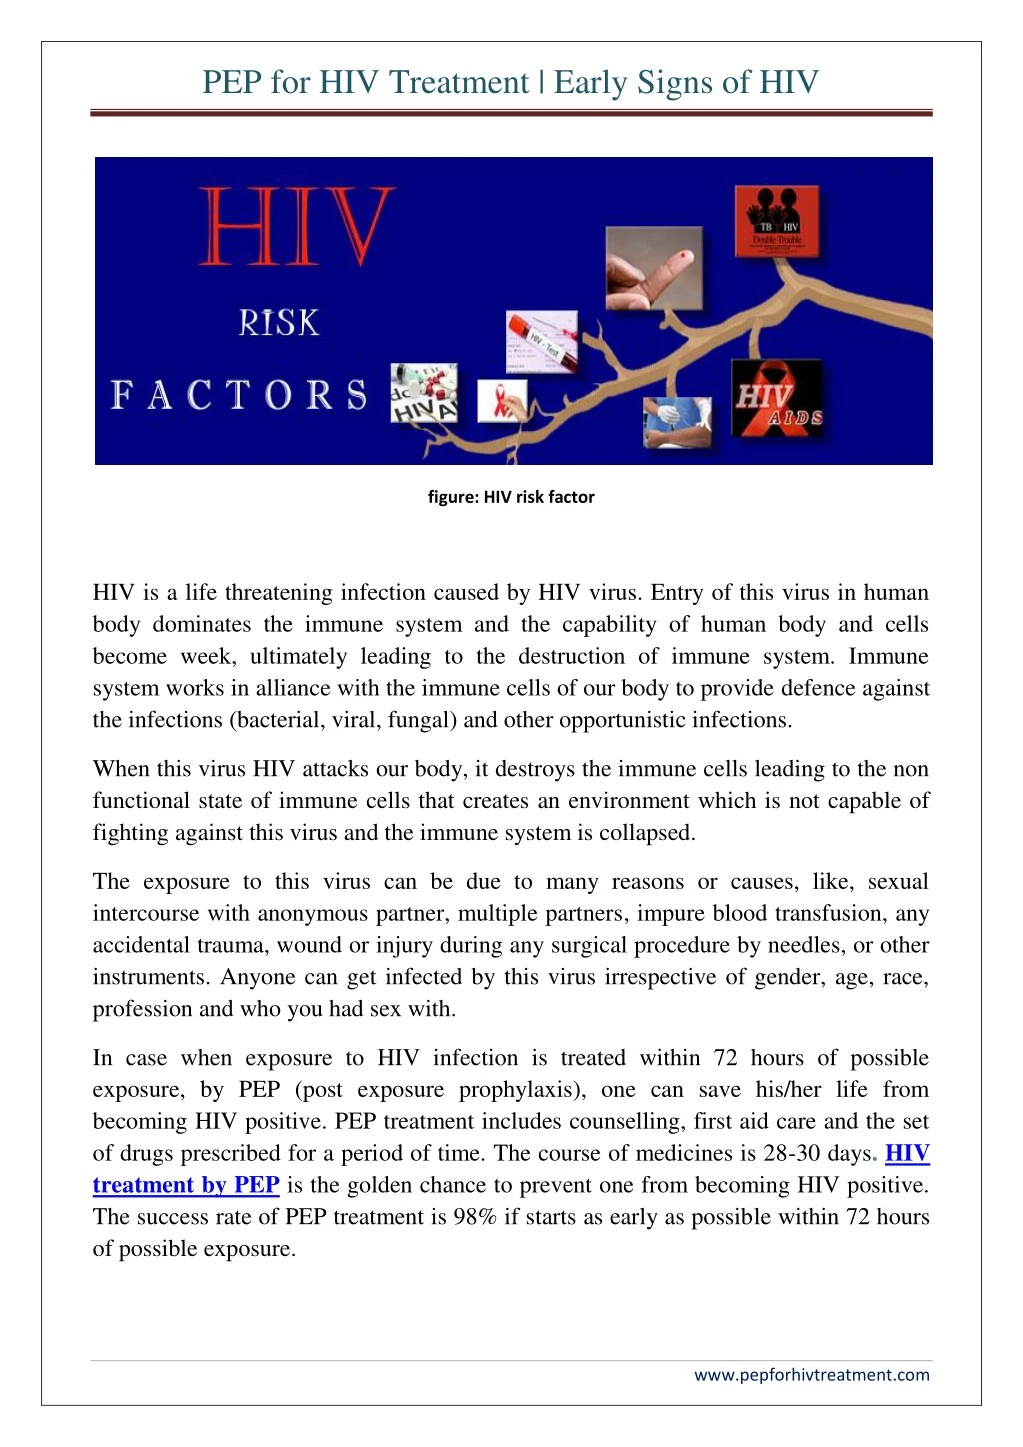 pep for hiv treatment early signs of hiv